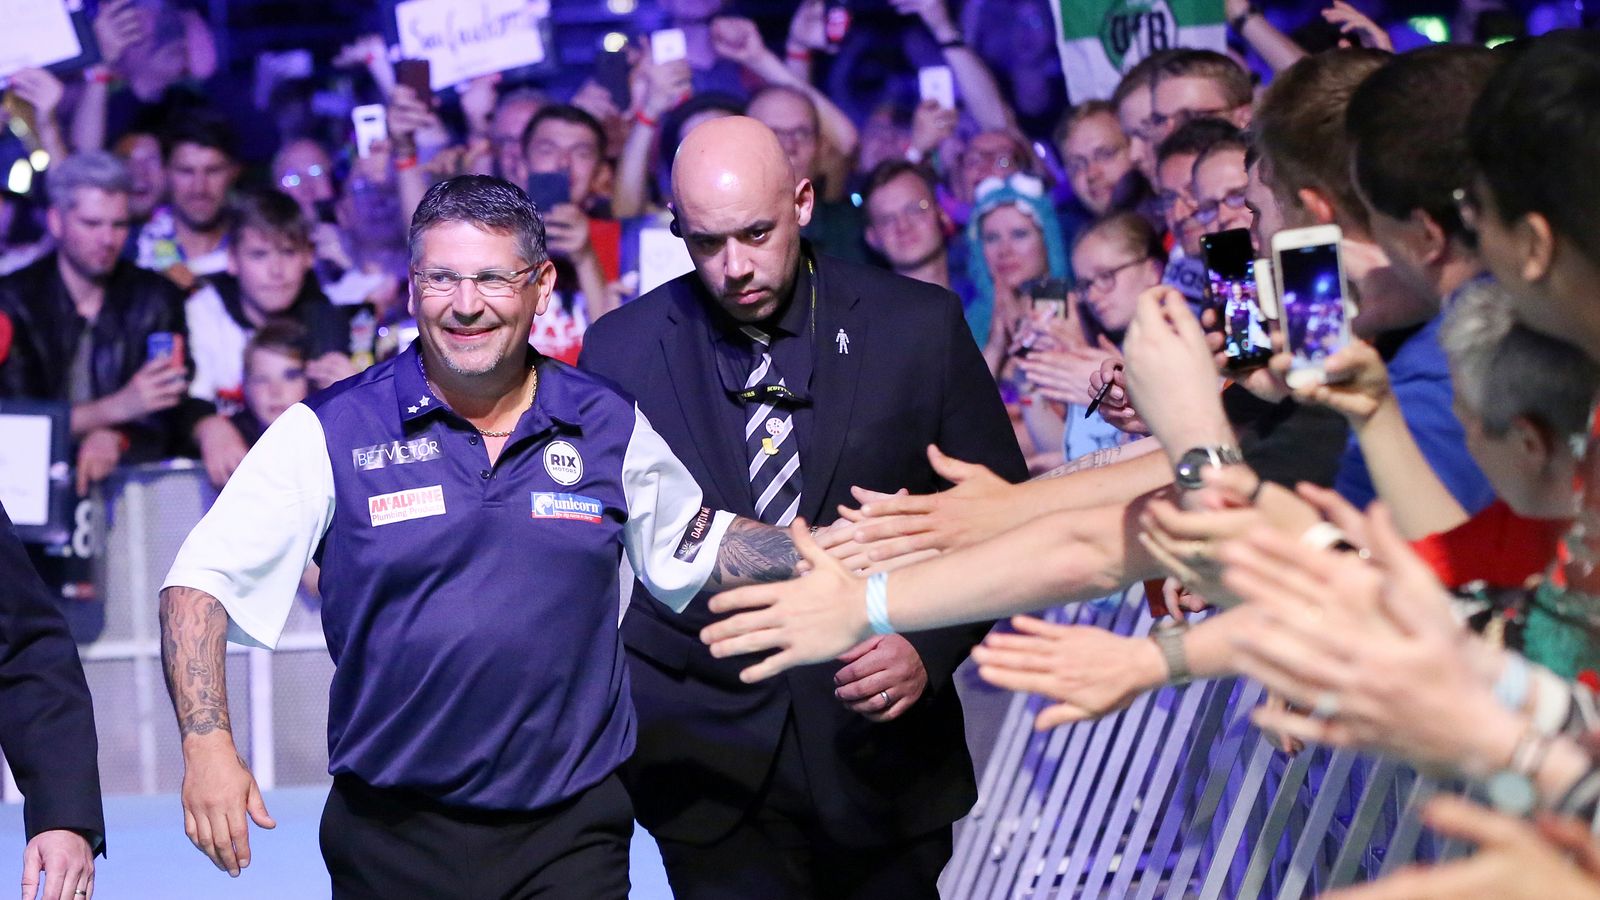 Gary Anderson on his walk-on song and the best atmosphere in darts ...